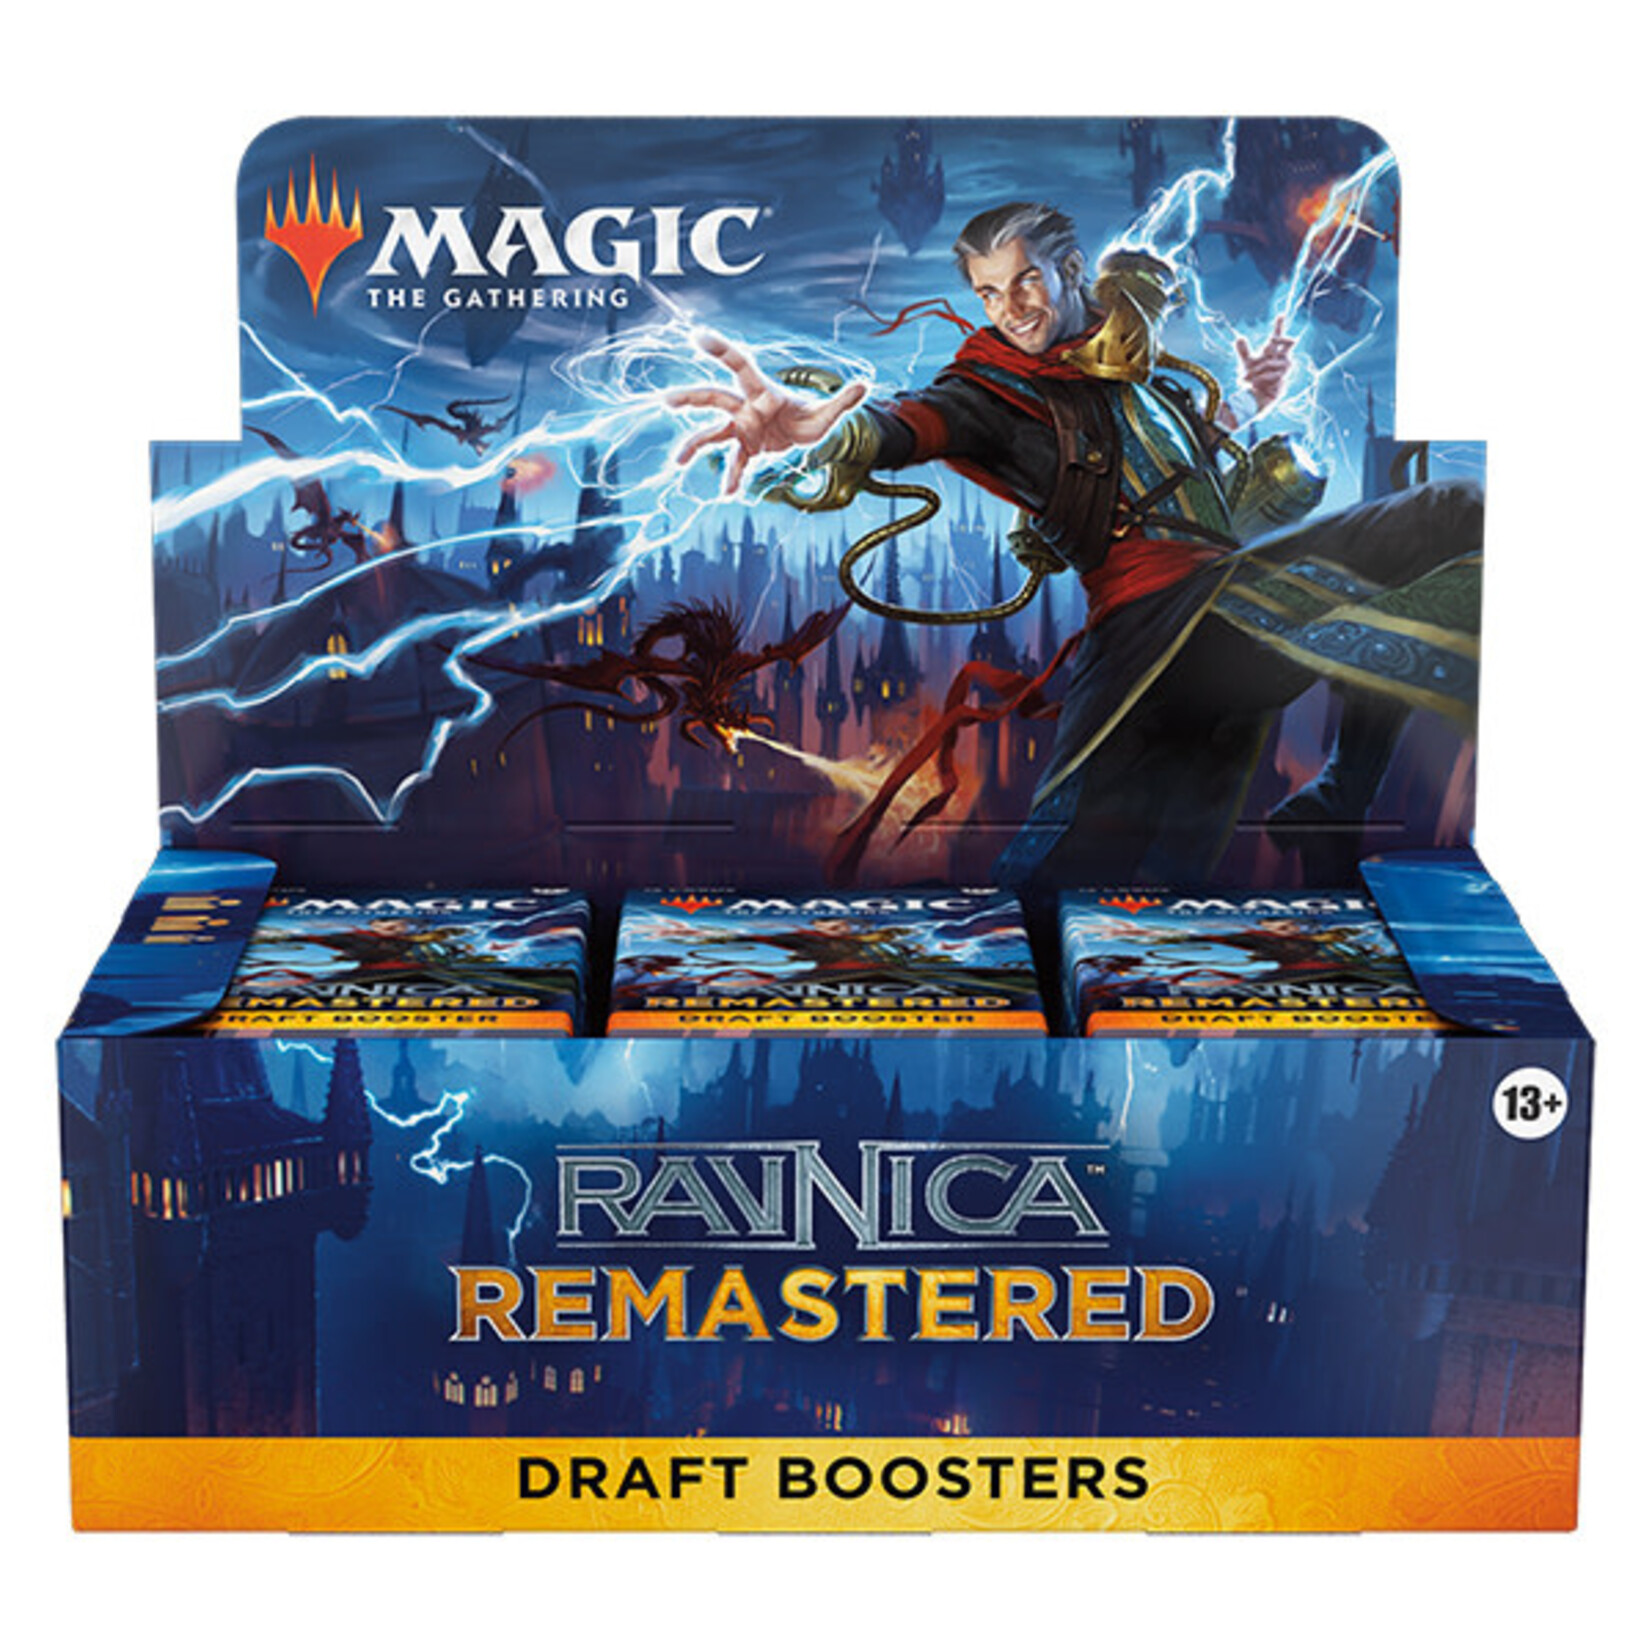 Wizards of the Coast Magic - Ravnica Remastered Draft Booster Box